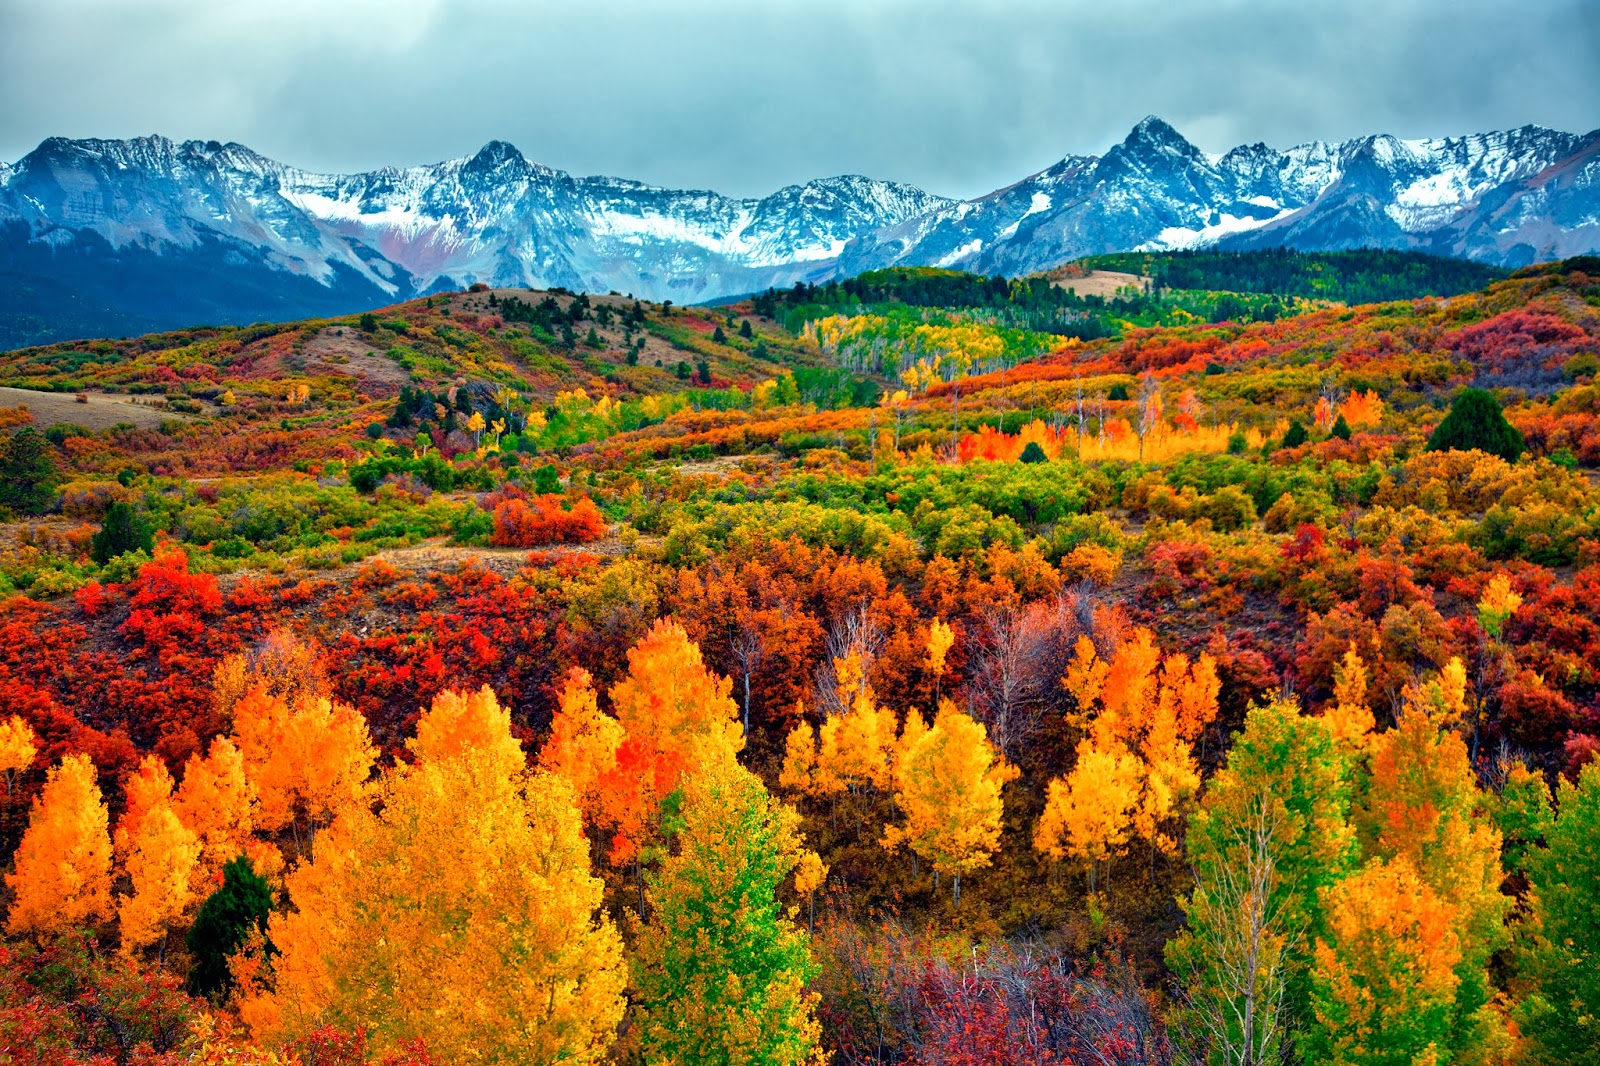 Critter Sitter's Blog: Fall Foliage Photos From National Parks